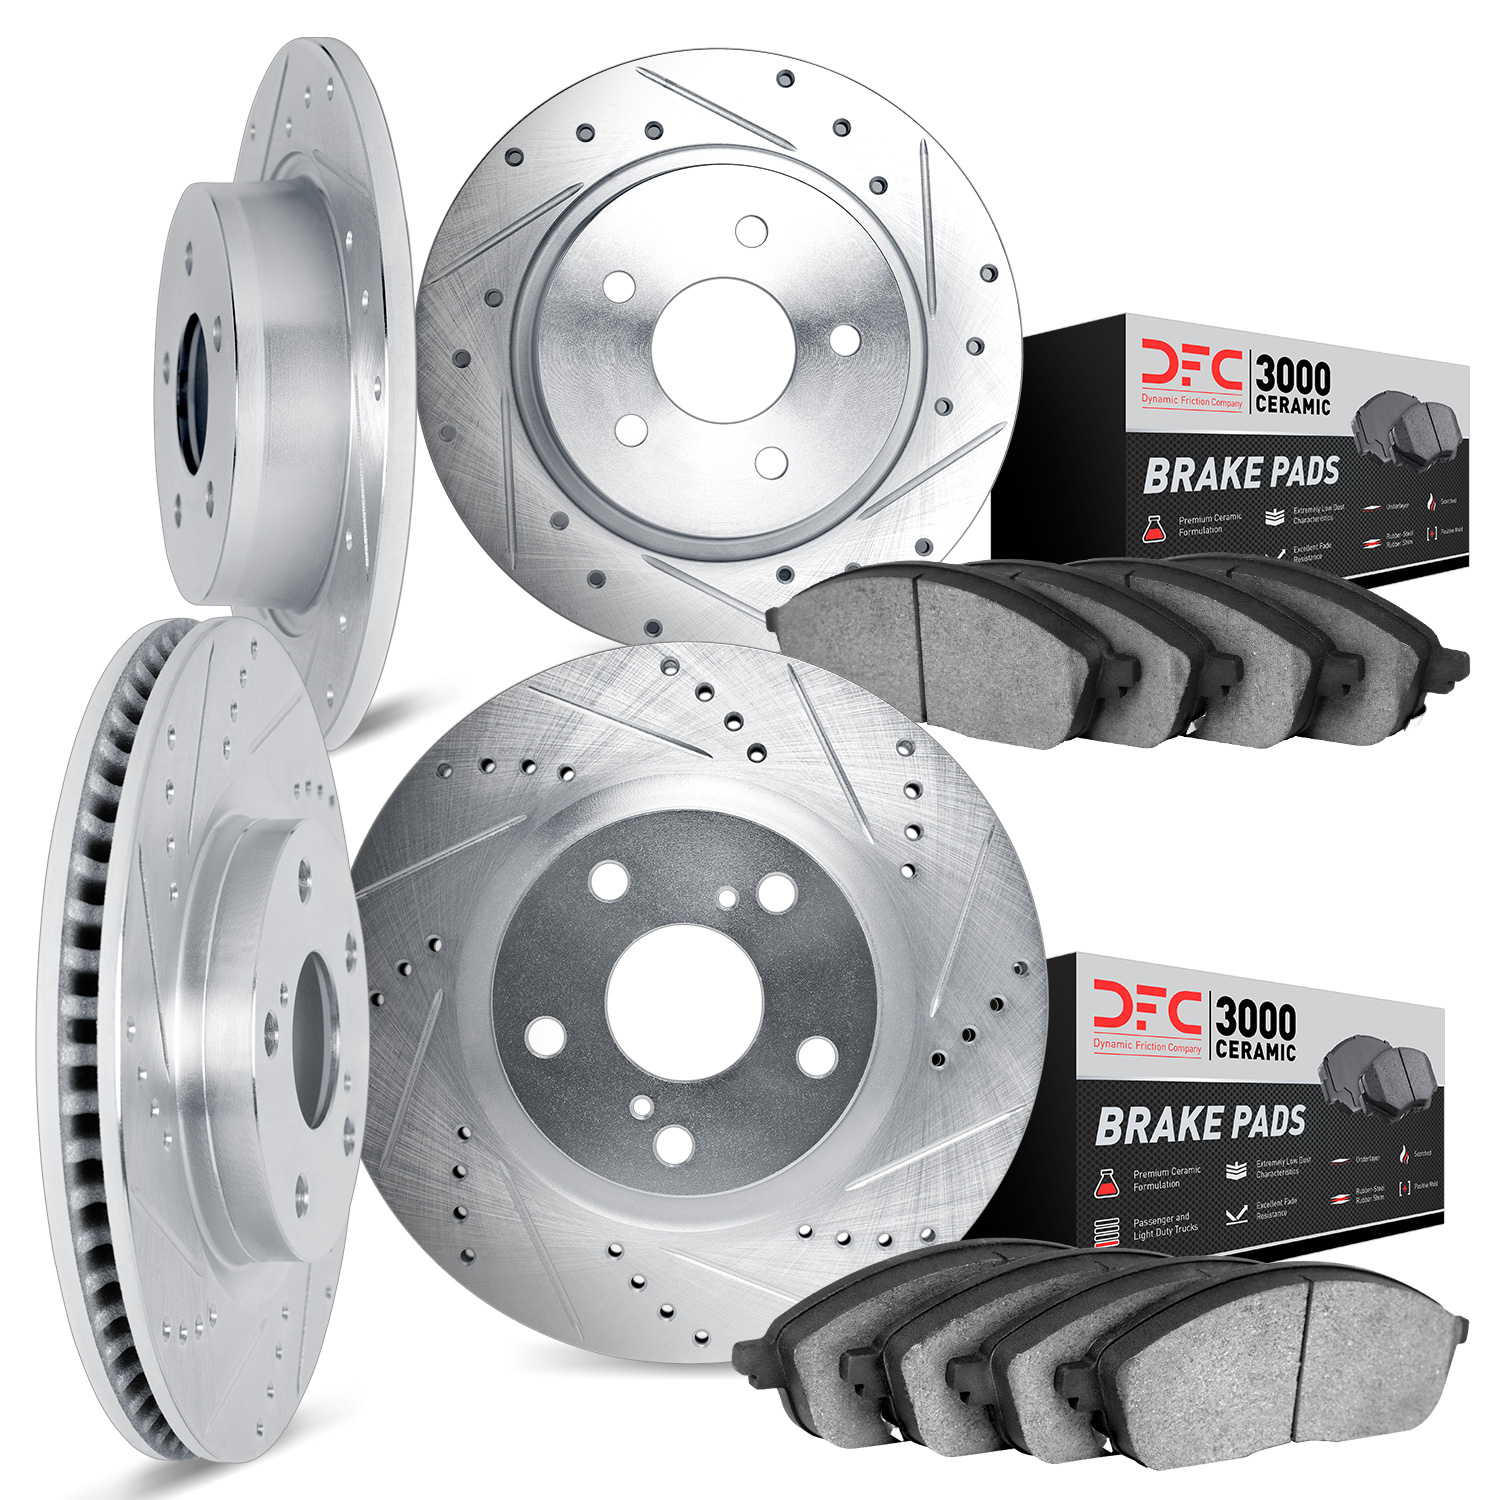 7304-56014 Drilled/Slotted Brake Rotor with 3000-Series Ceramic Brake Pads Kit [Silver], 1996-1997 Ford/Lincoln/Mercury/Mazda, P